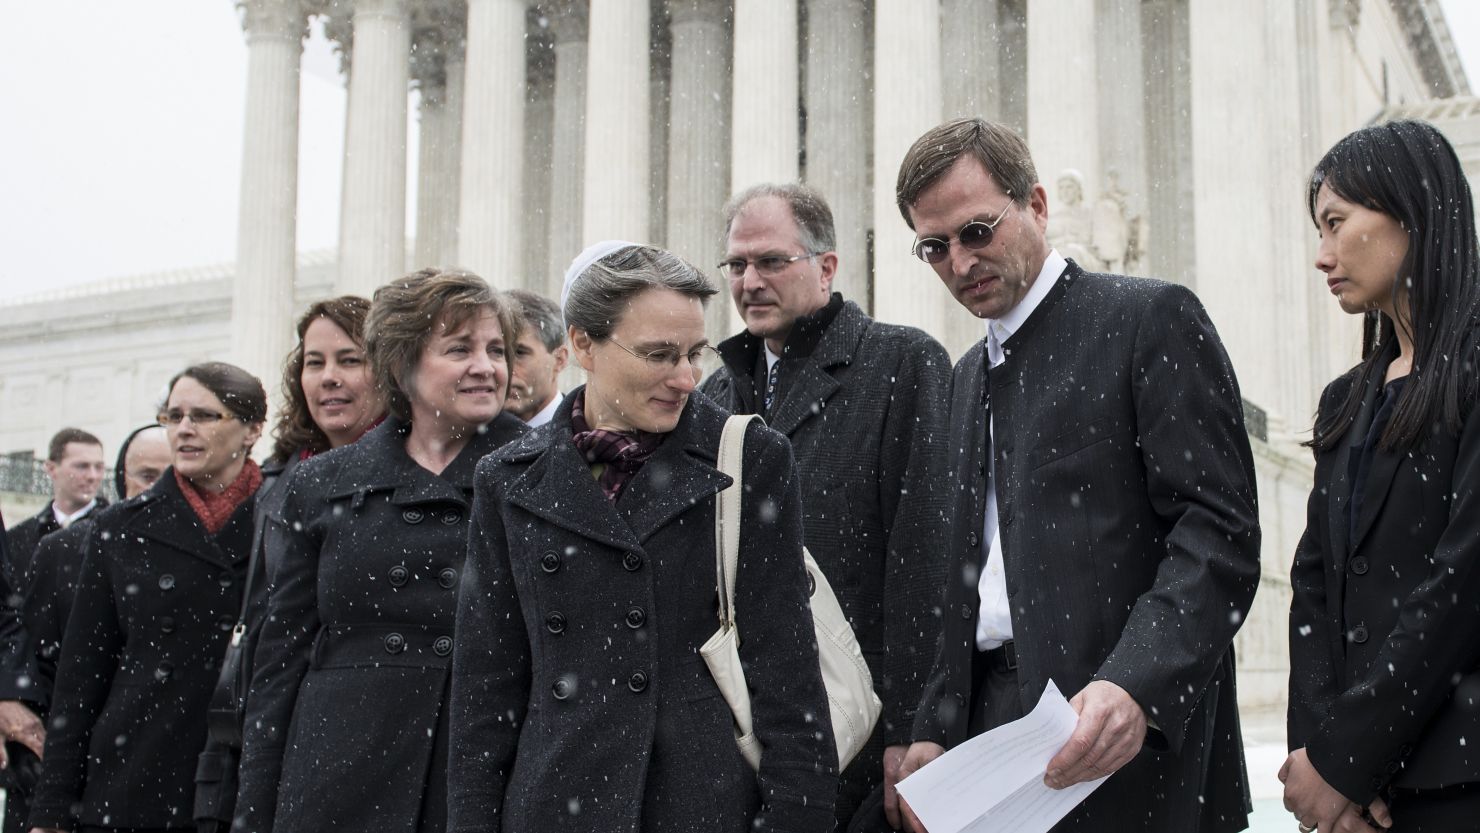 Carolyn Hahn, center, watches as husband Anthony prepares to talk to reporters outside the U.S. Supreme Court on March 25.